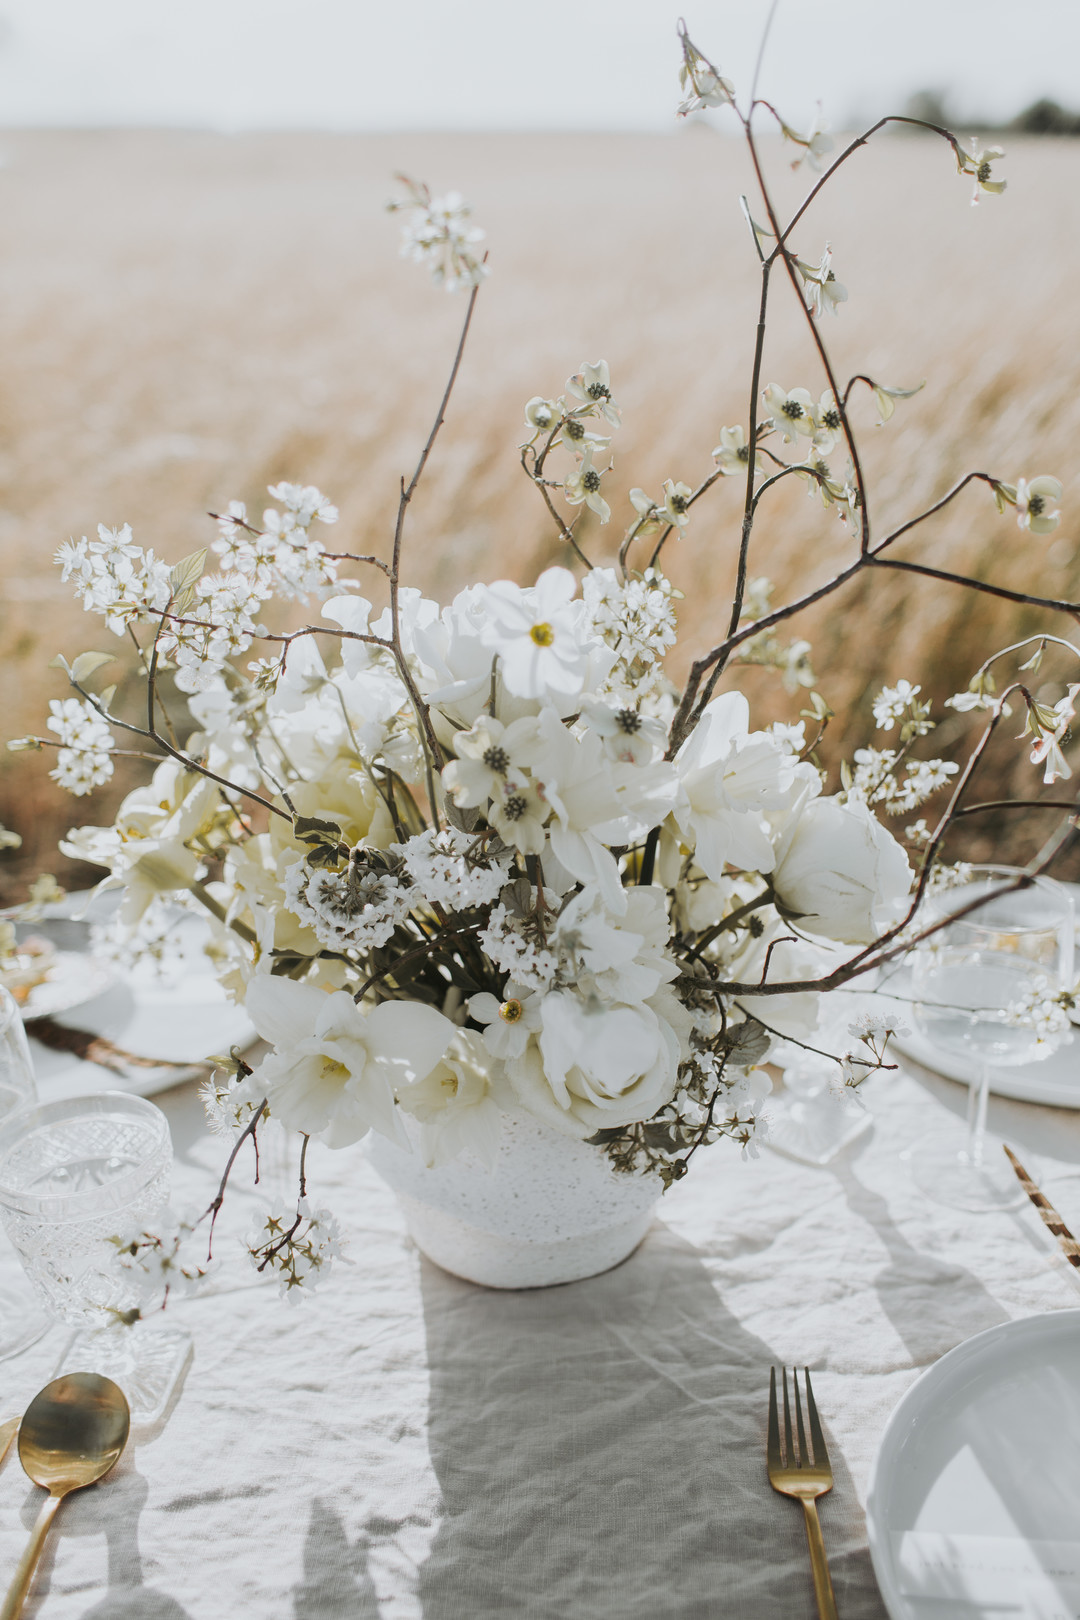 Monochromatic countryside double wedding inspiration two brides two grooms outdoors elopement intimate wedding flowers